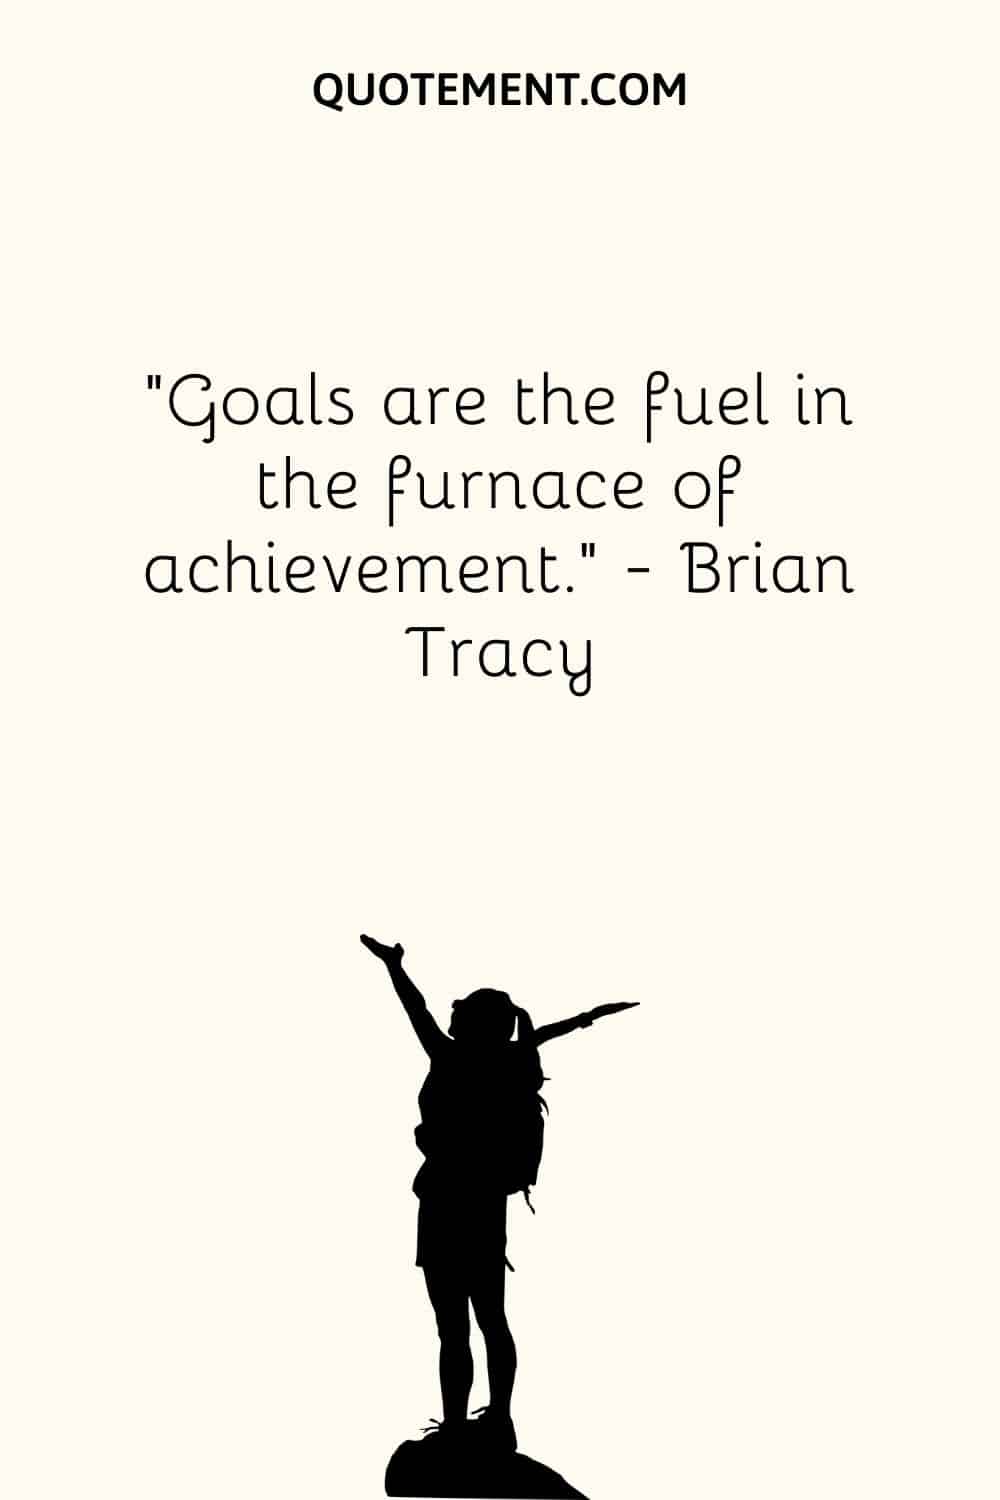 girl with raised hands illustration representing quote about achieving your goals